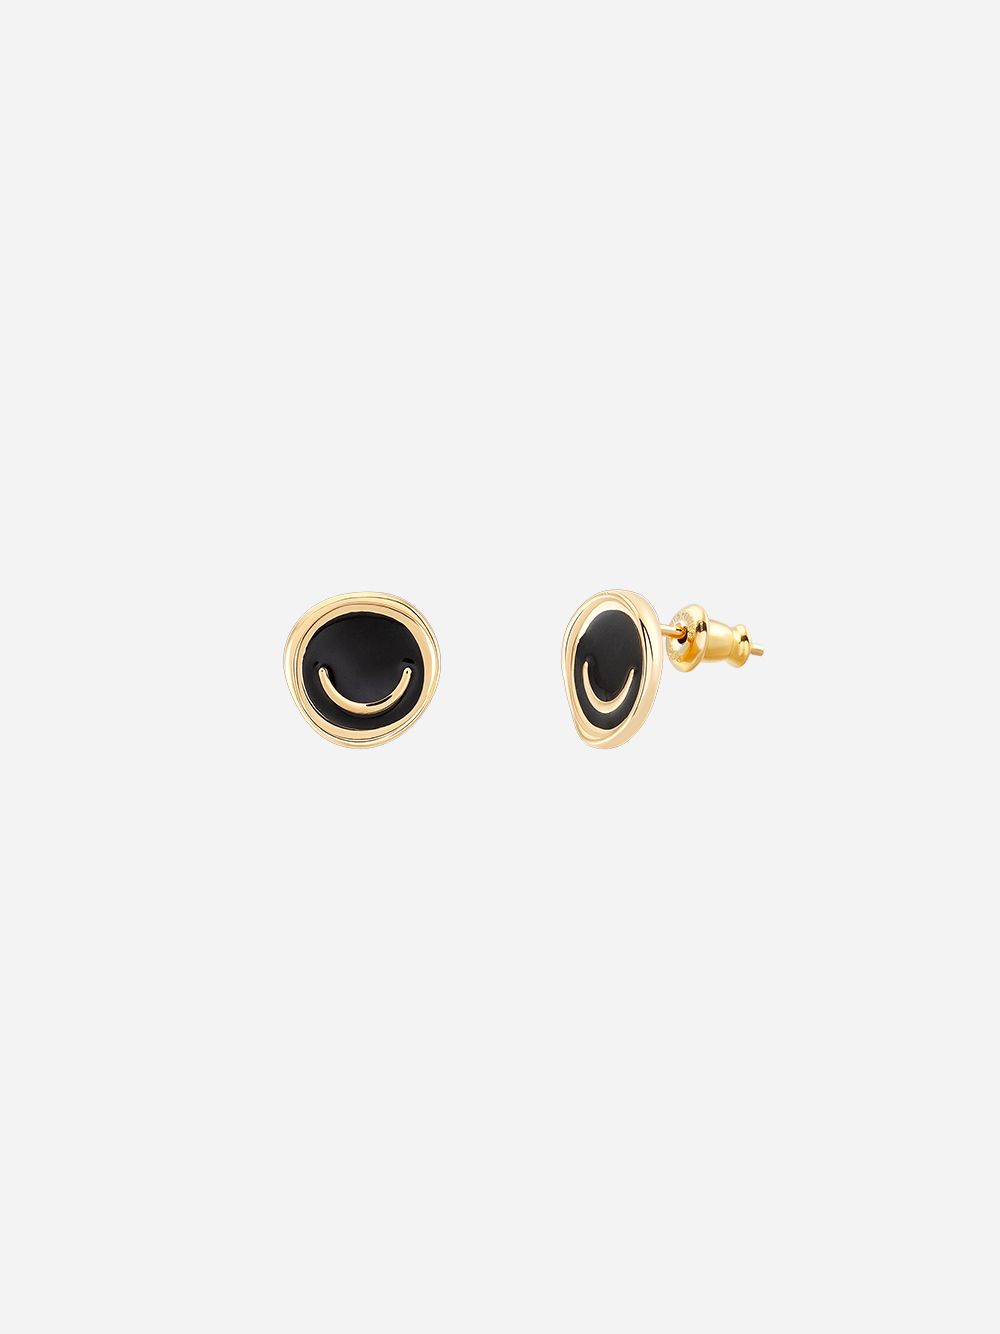 Happiness Earrings | Wonther